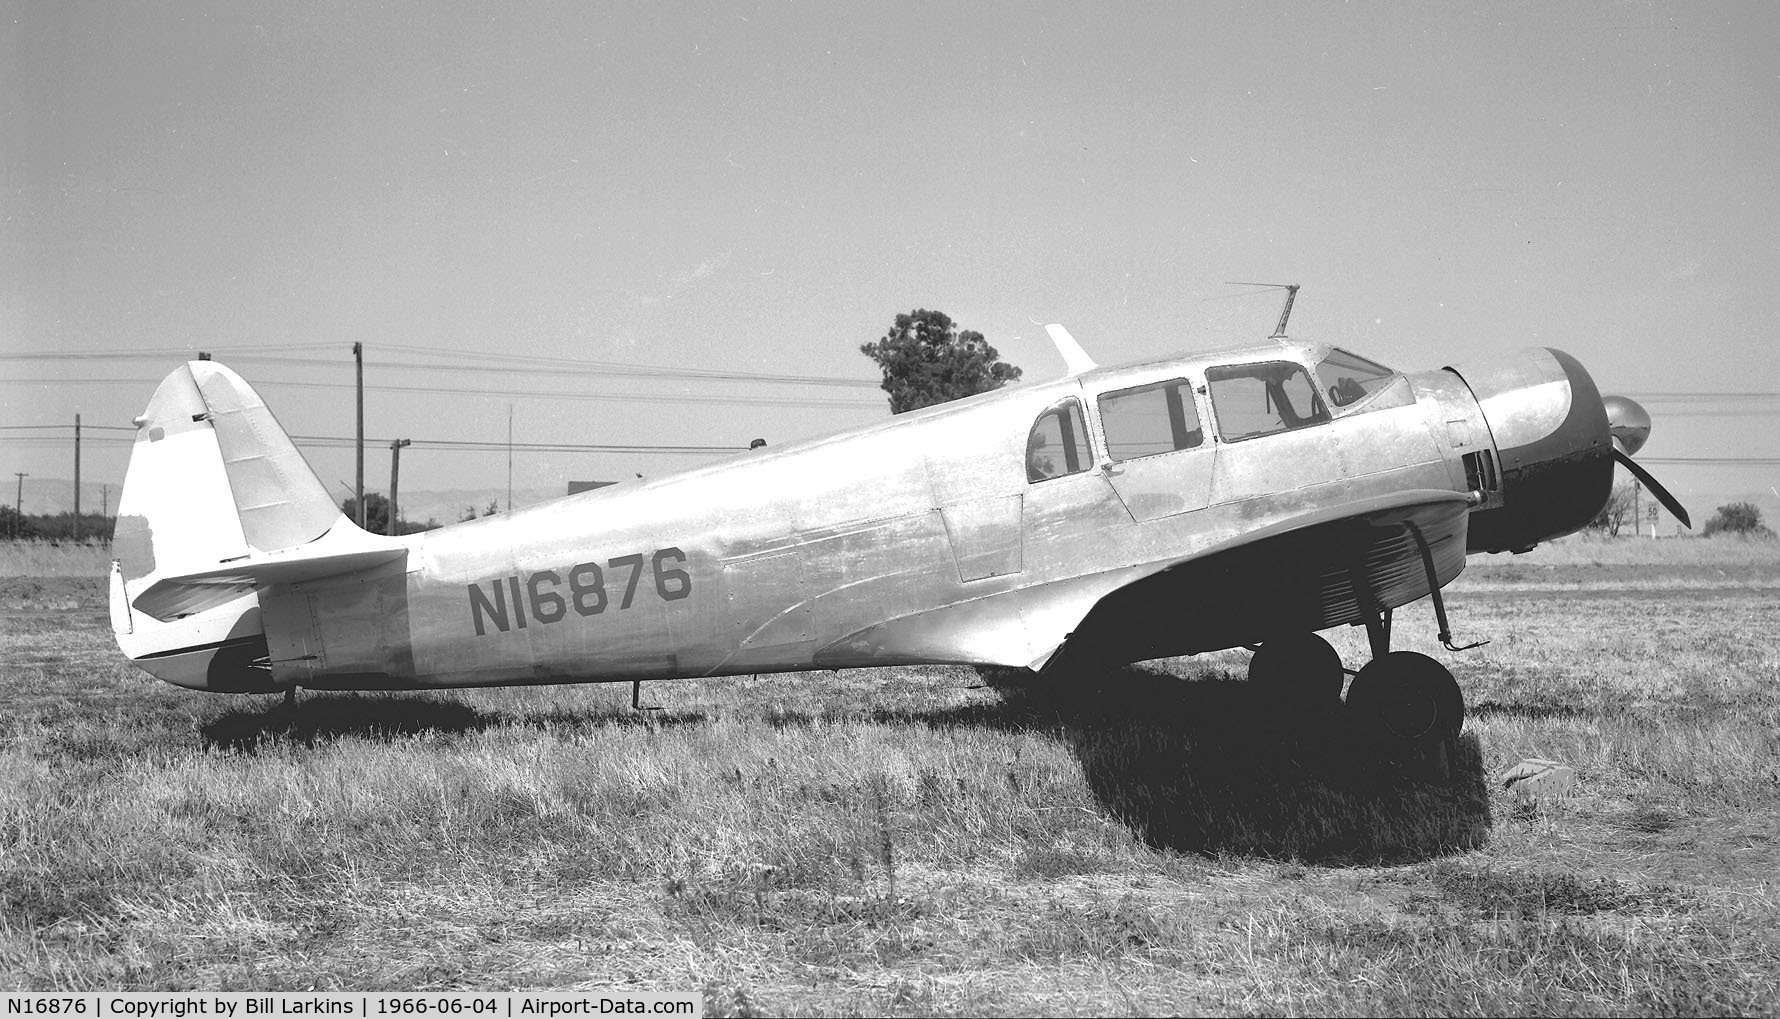 N16876, 1937 Fairchild F-45 C/N 4012, Metalized fuselage. At Newman, CA, in 1966.